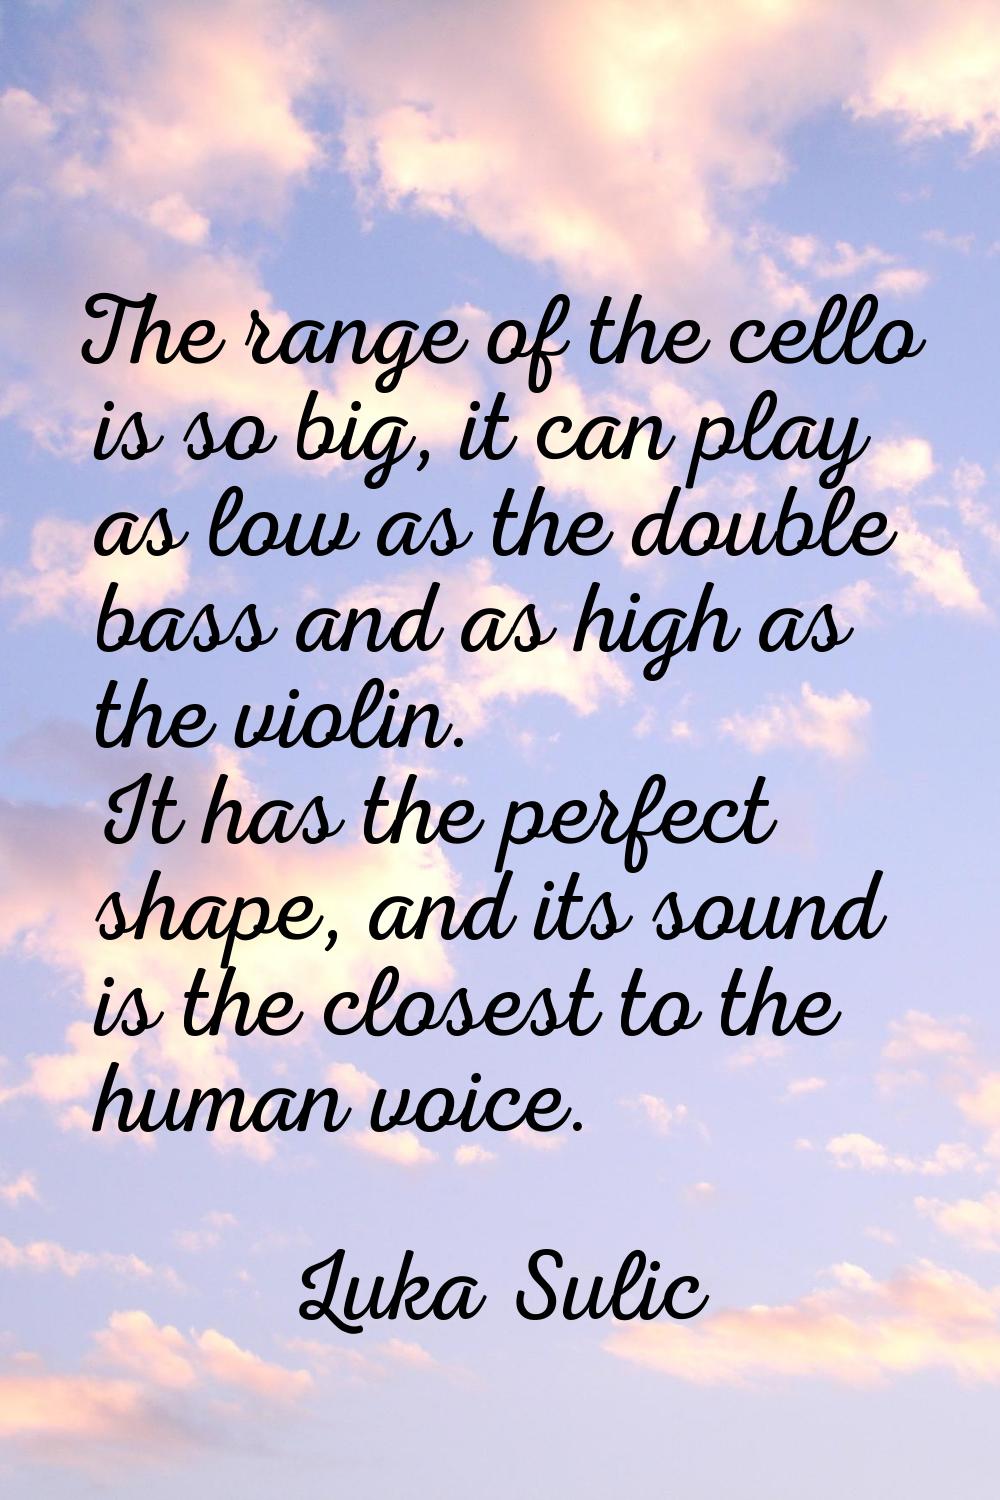 The range of the cello is so big, it can play as low as the double bass and as high as the violin. 